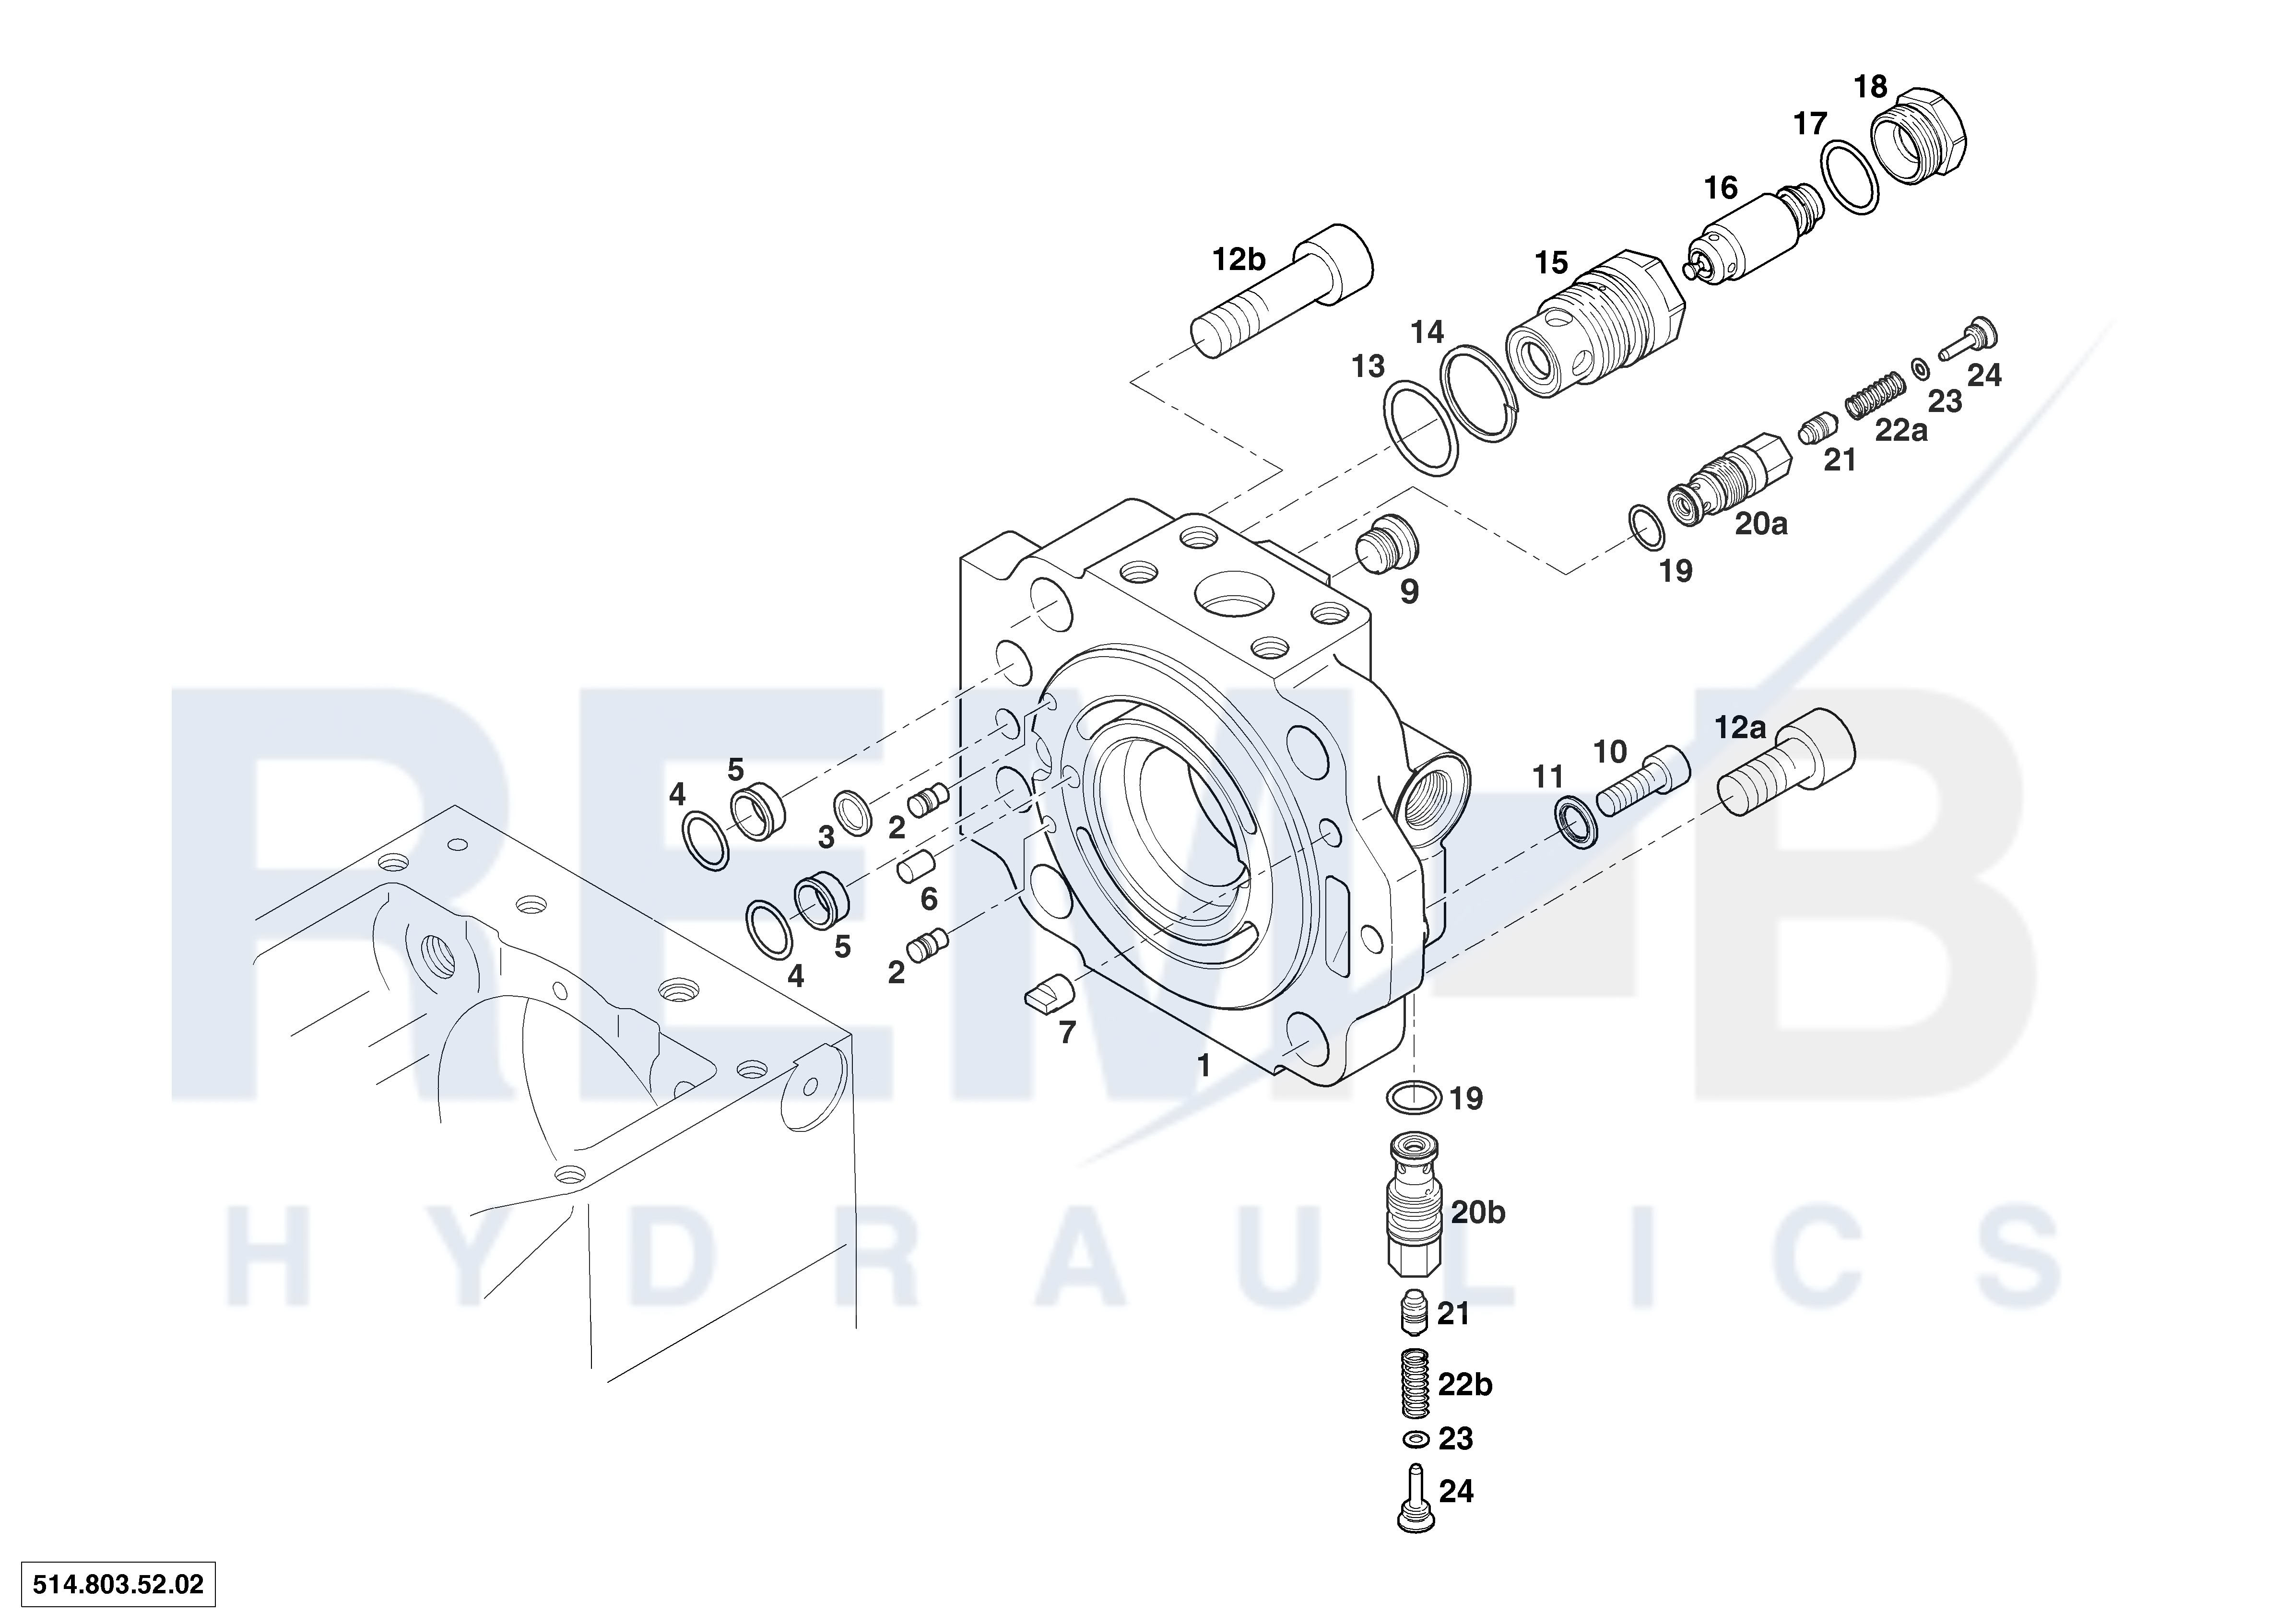 PORT PLATE HOUSING AND VALVES